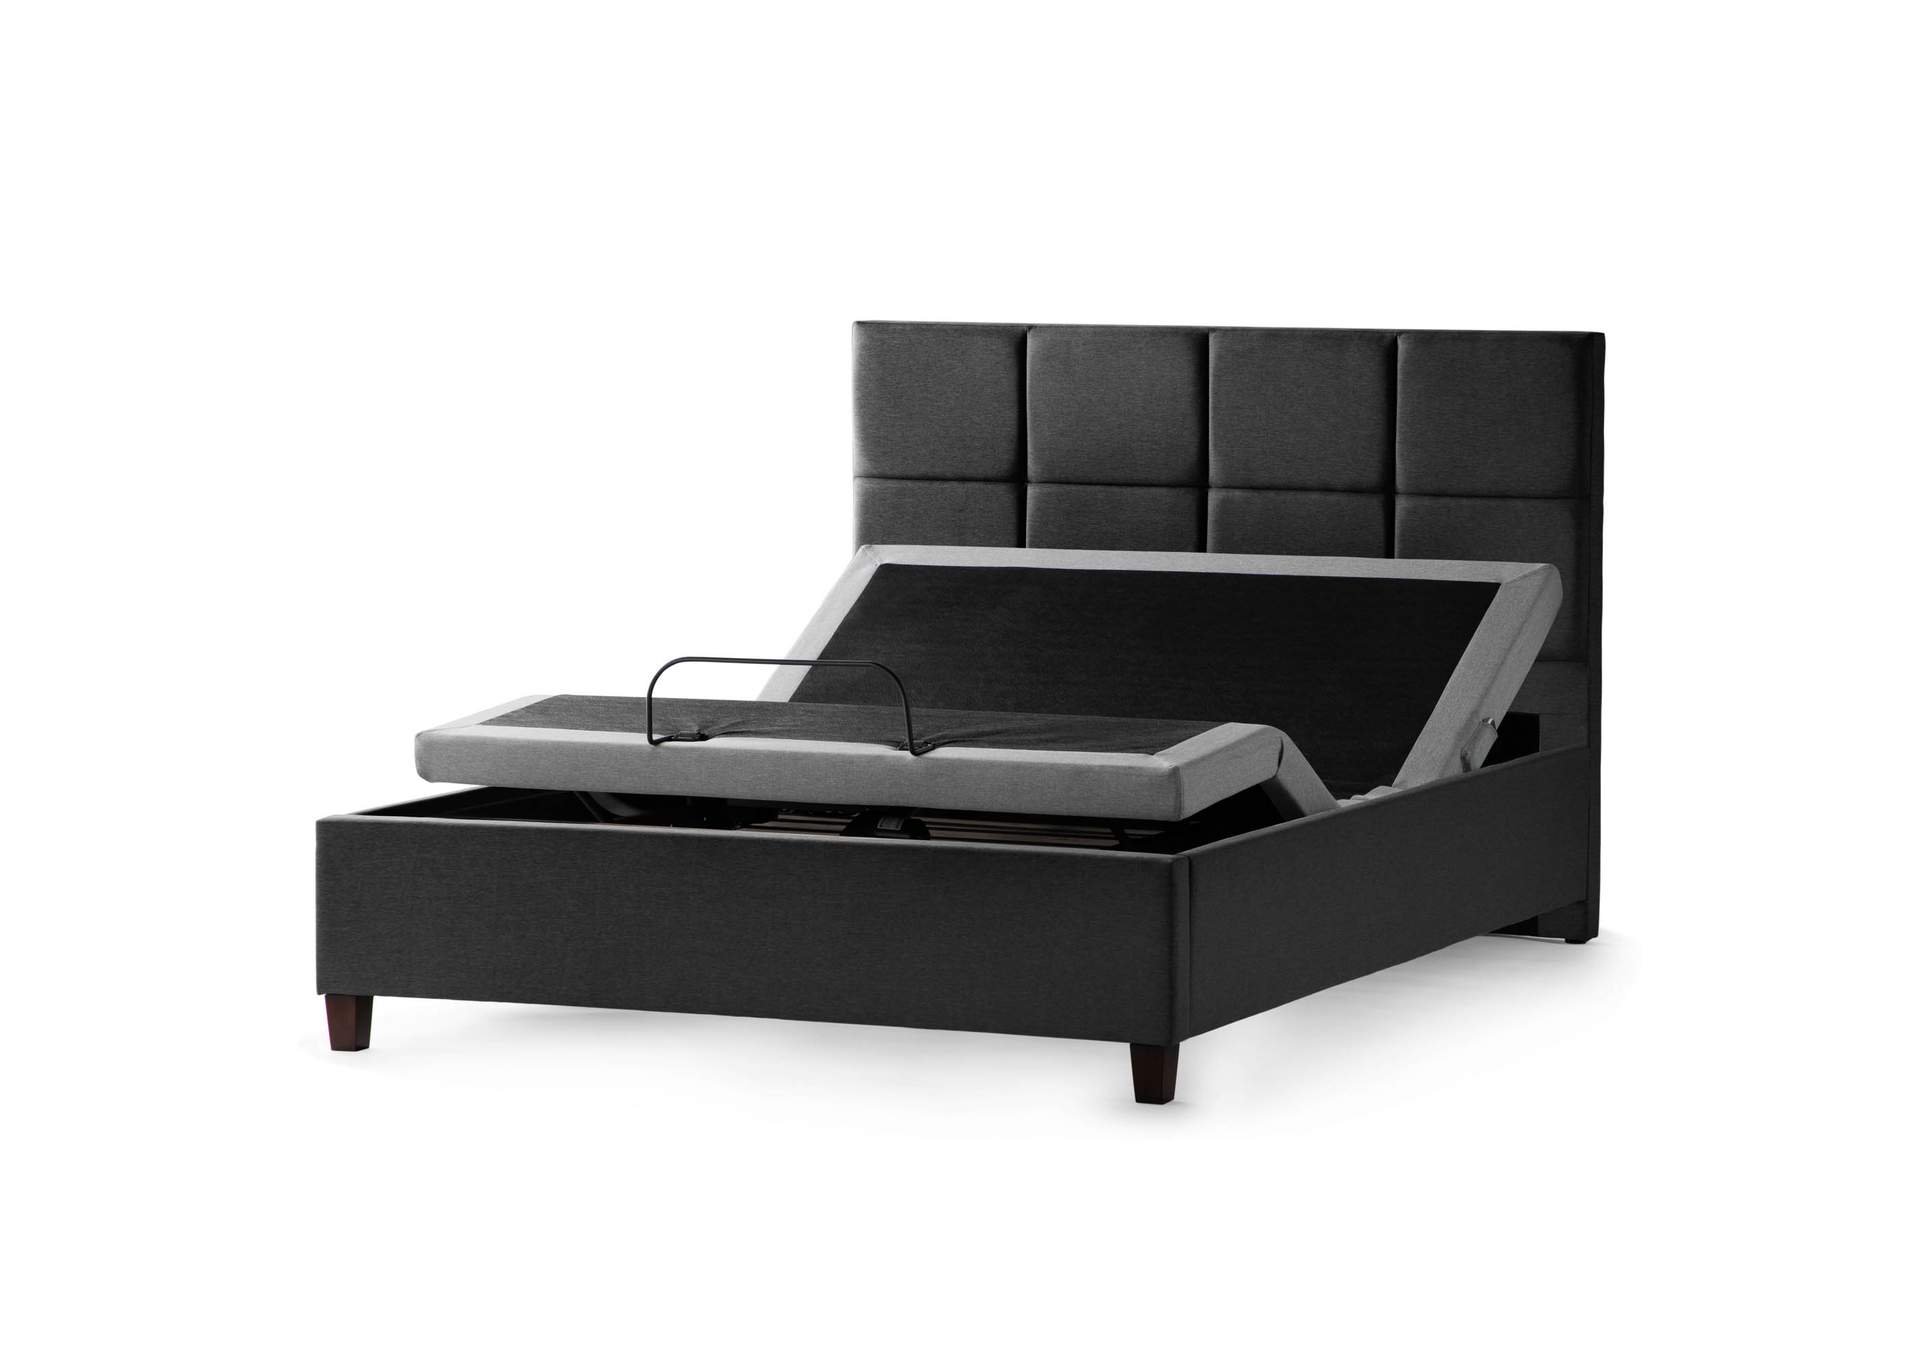 Malouf Charcoal Scoresby Upholstered California King Bed,Malouf